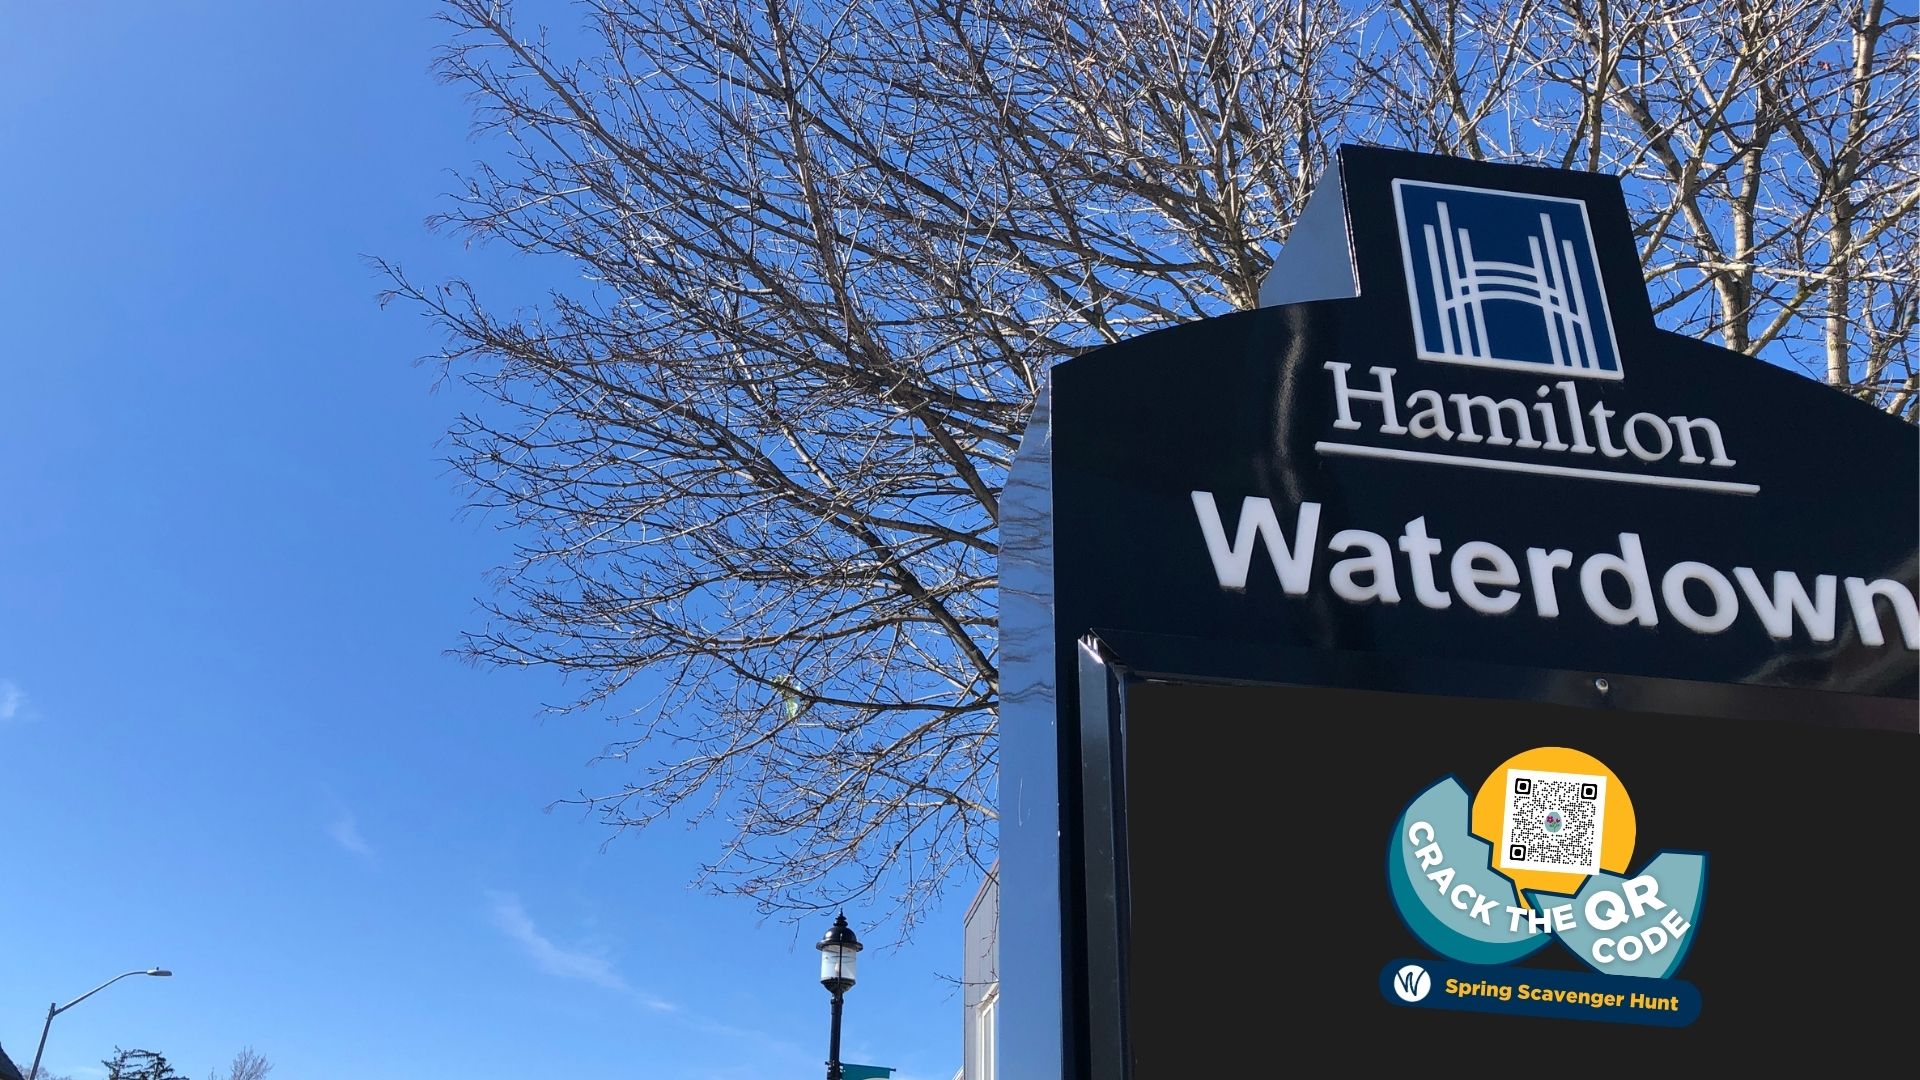 Waterdown Village Sign with Cracked QR Logo against a blue sky